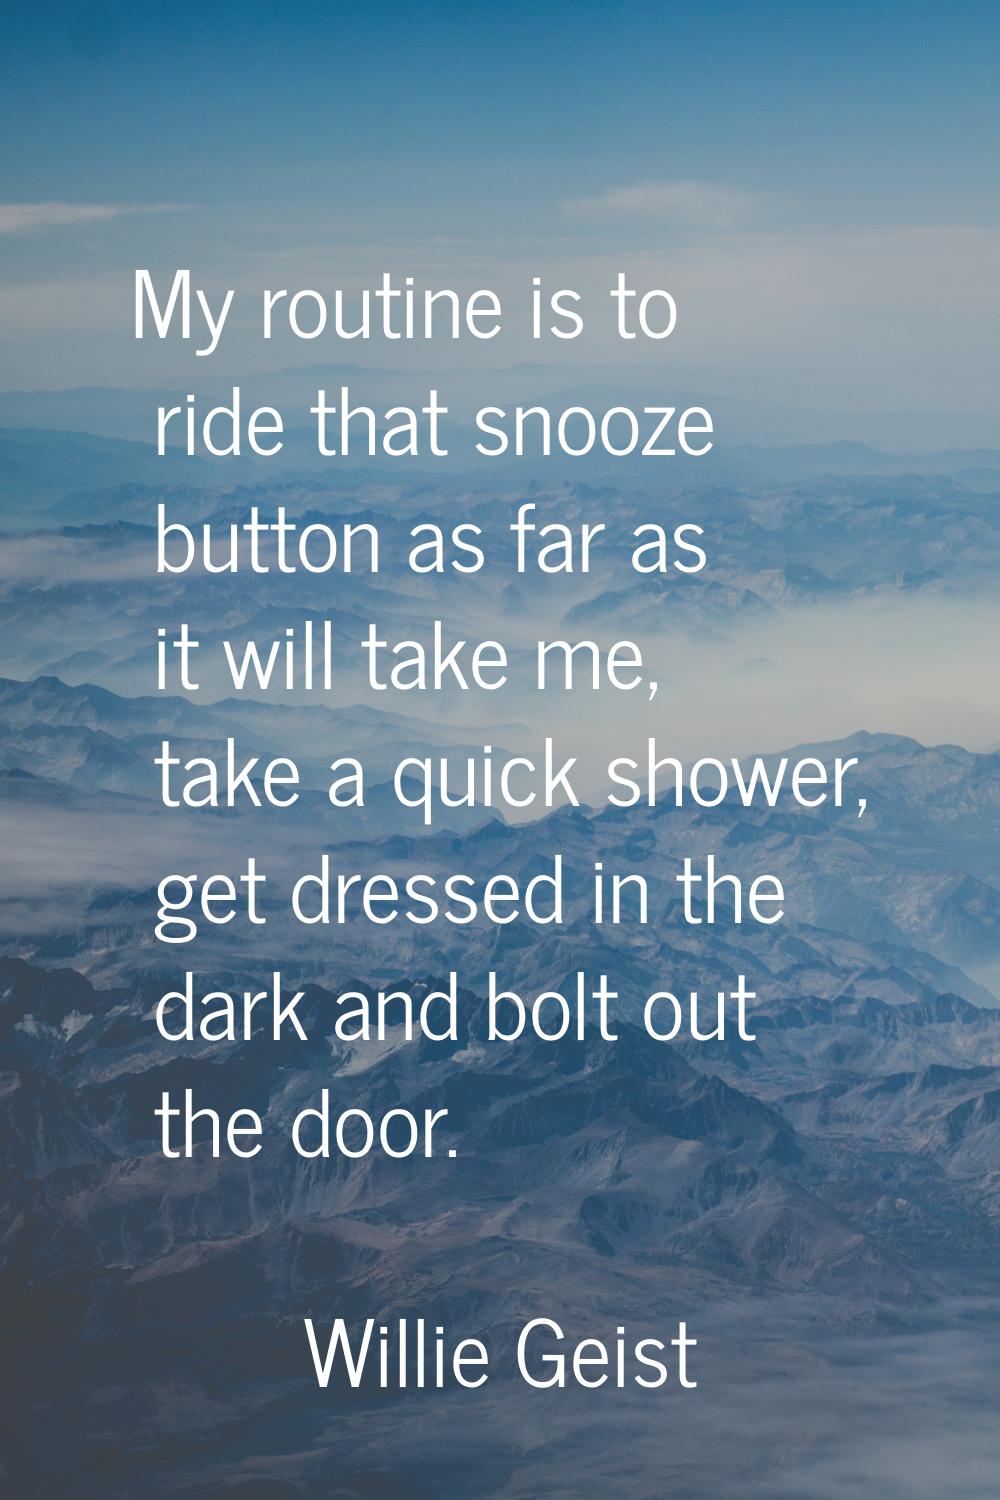 My routine is to ride that snooze button as far as it will take me, take a quick shower, get dresse